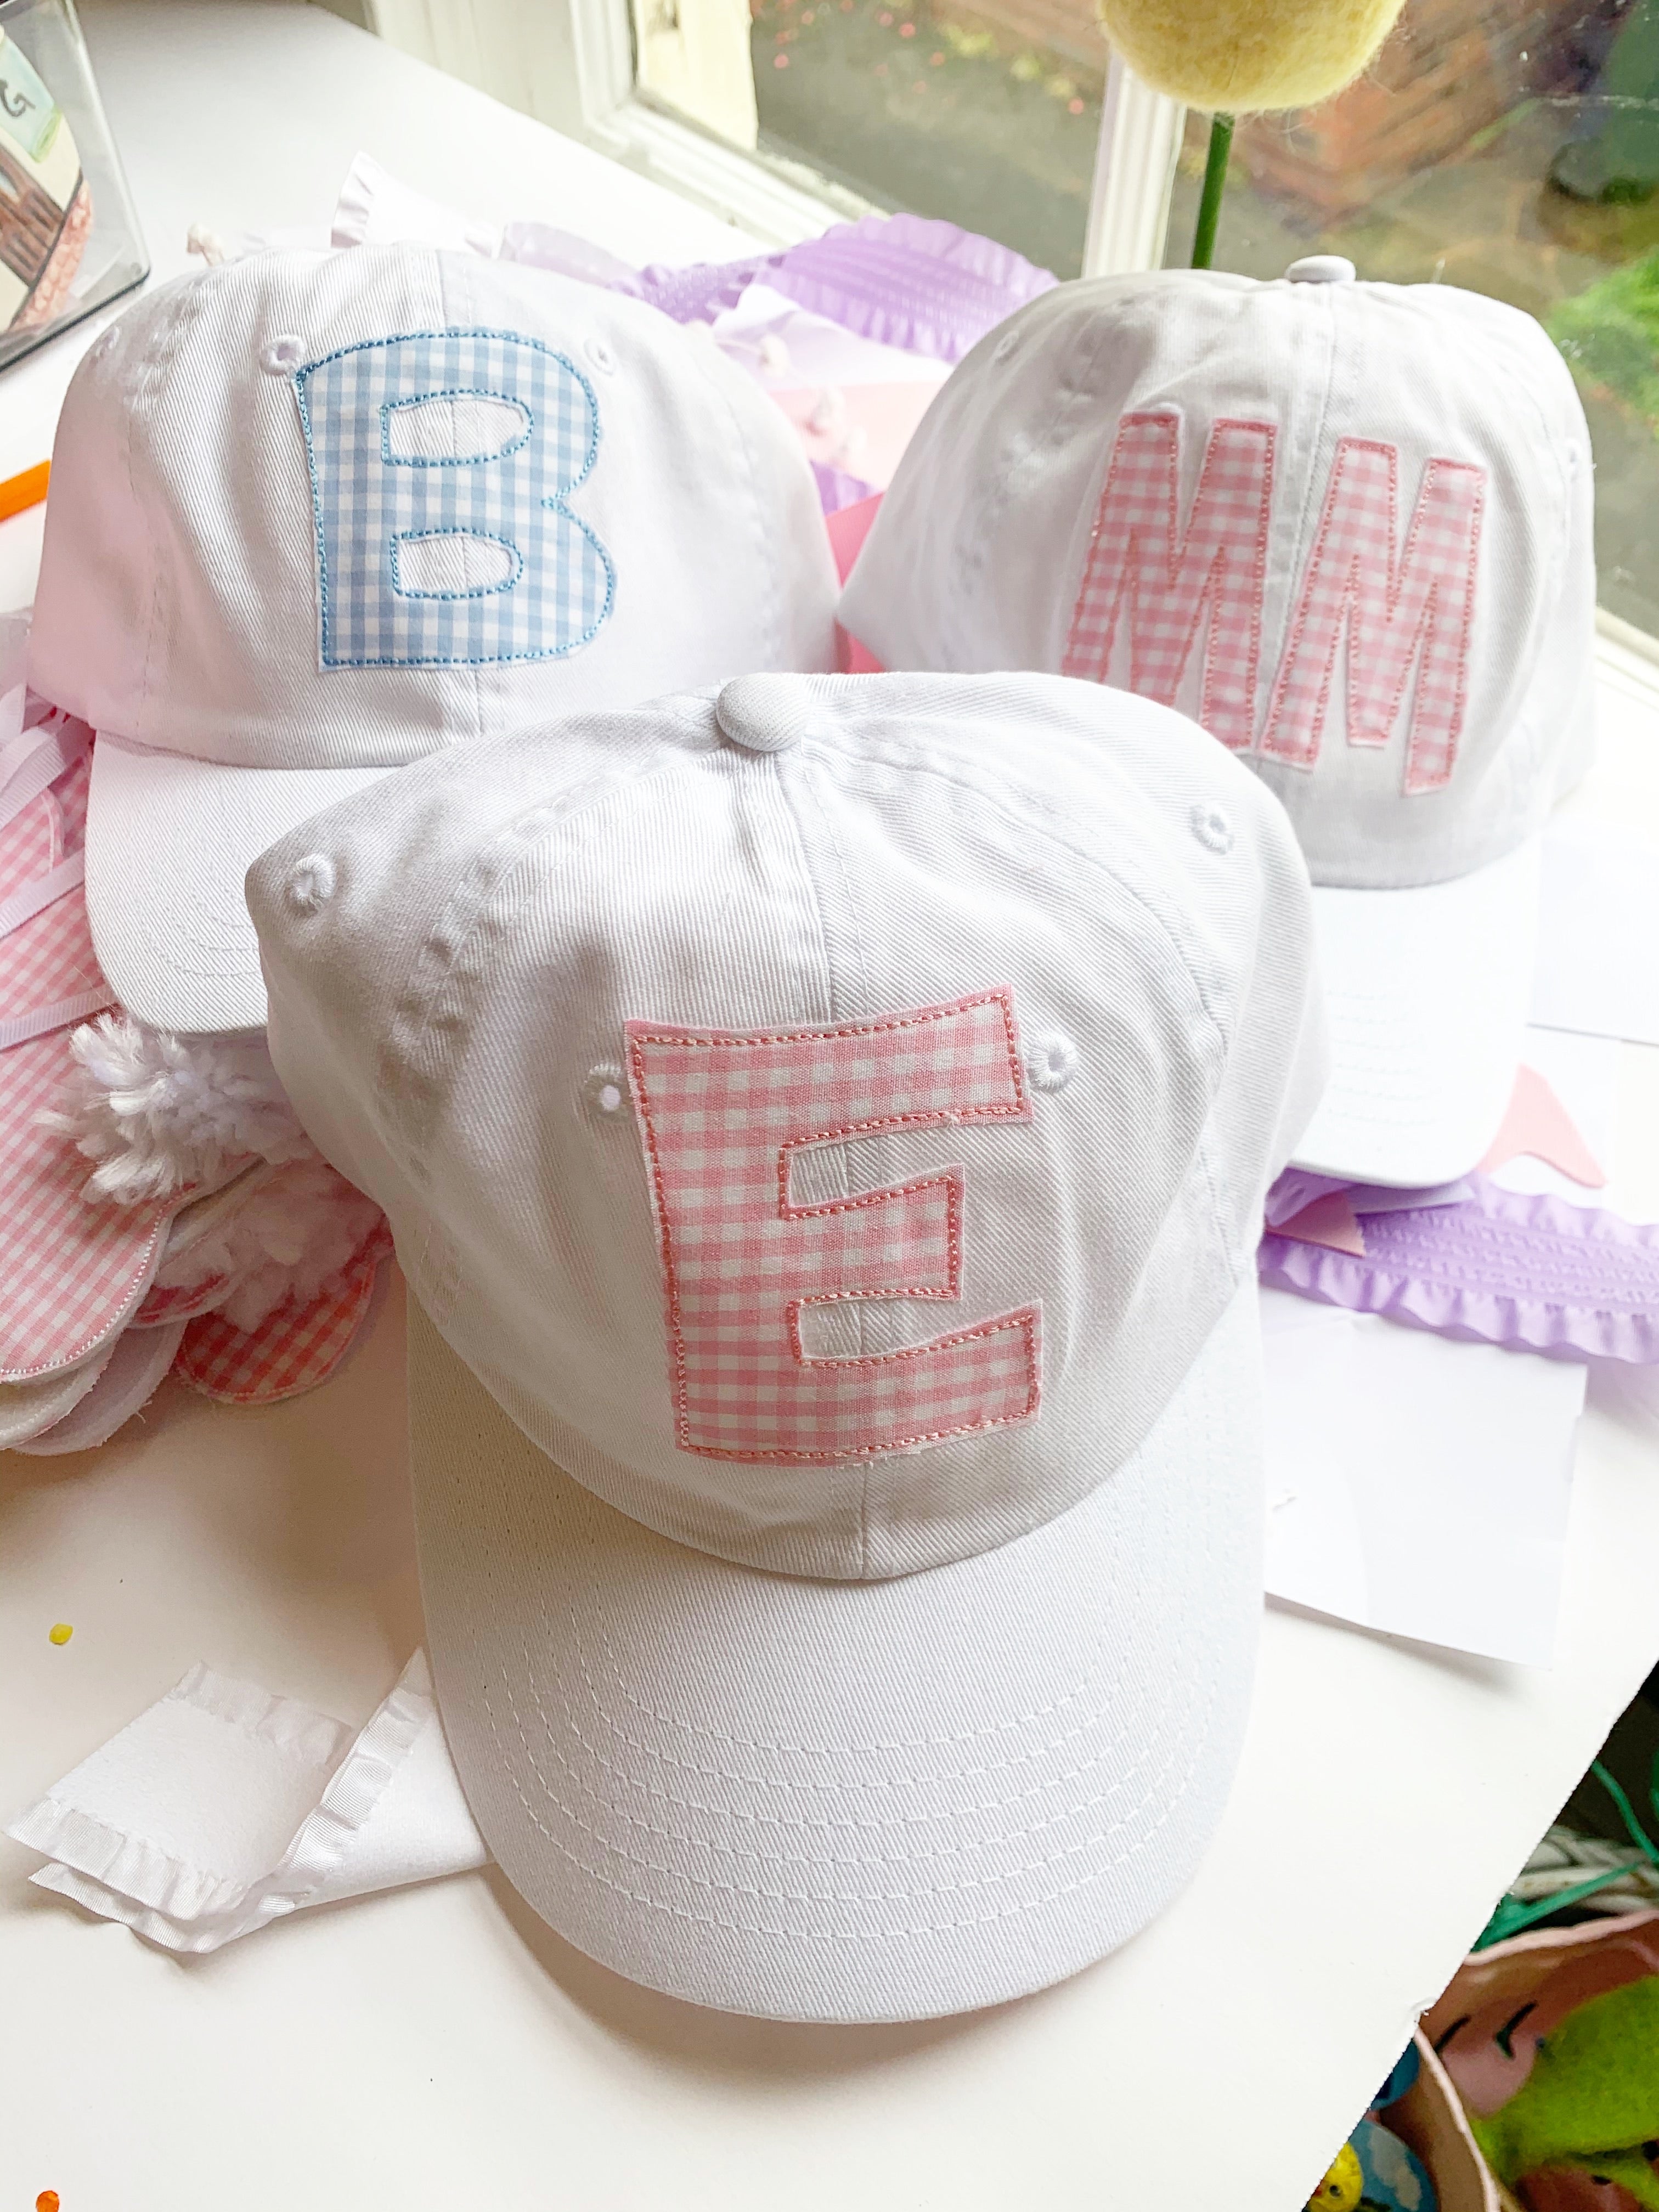 Initial White Hat in pink and blue